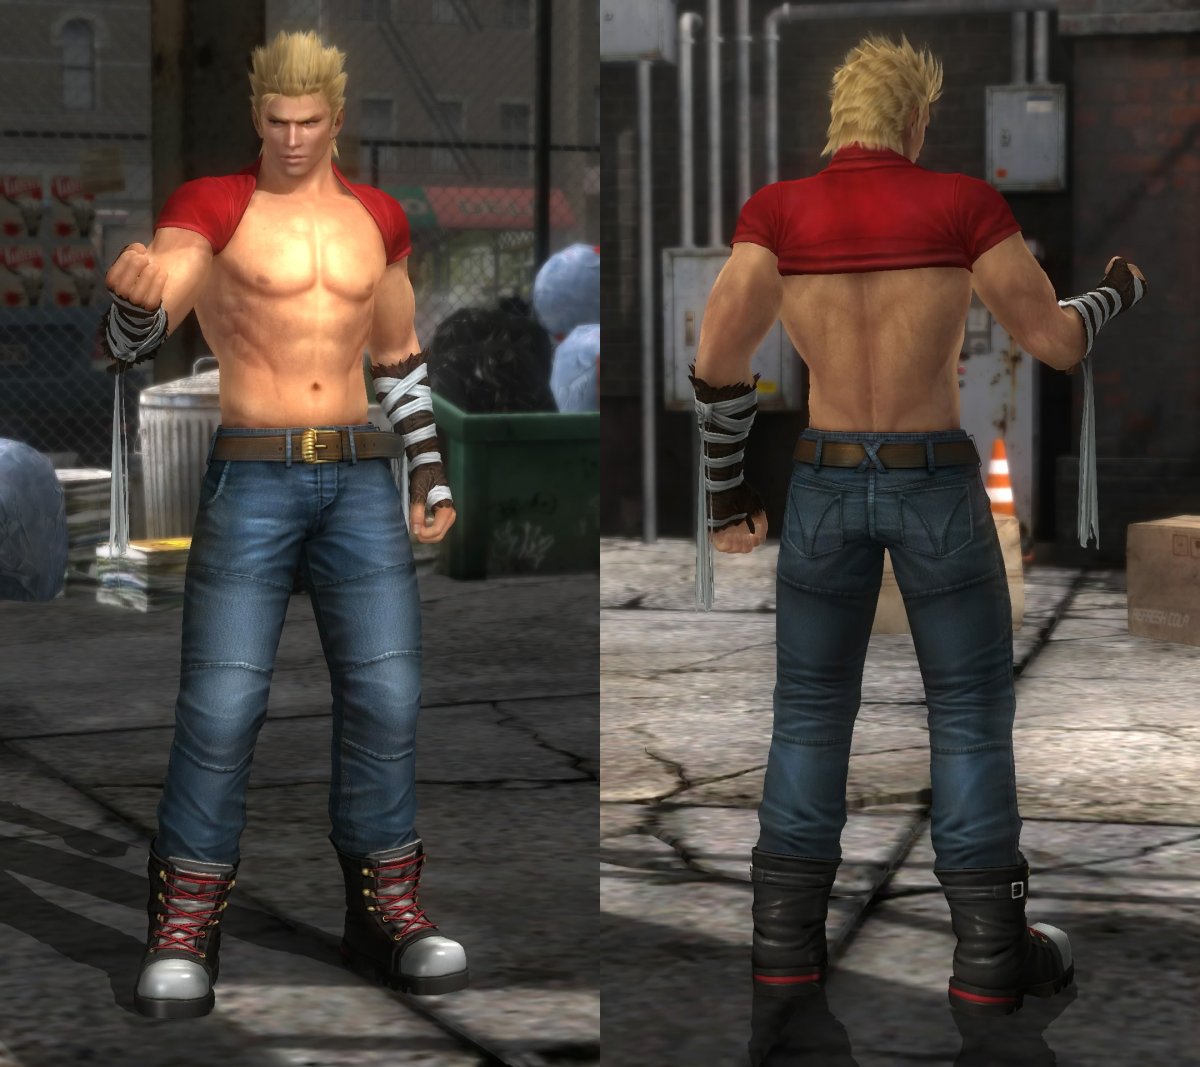 doa_last_round_s_exclusive_costumes__jacky__by_doafanboi-d8jz01d (1).jpg